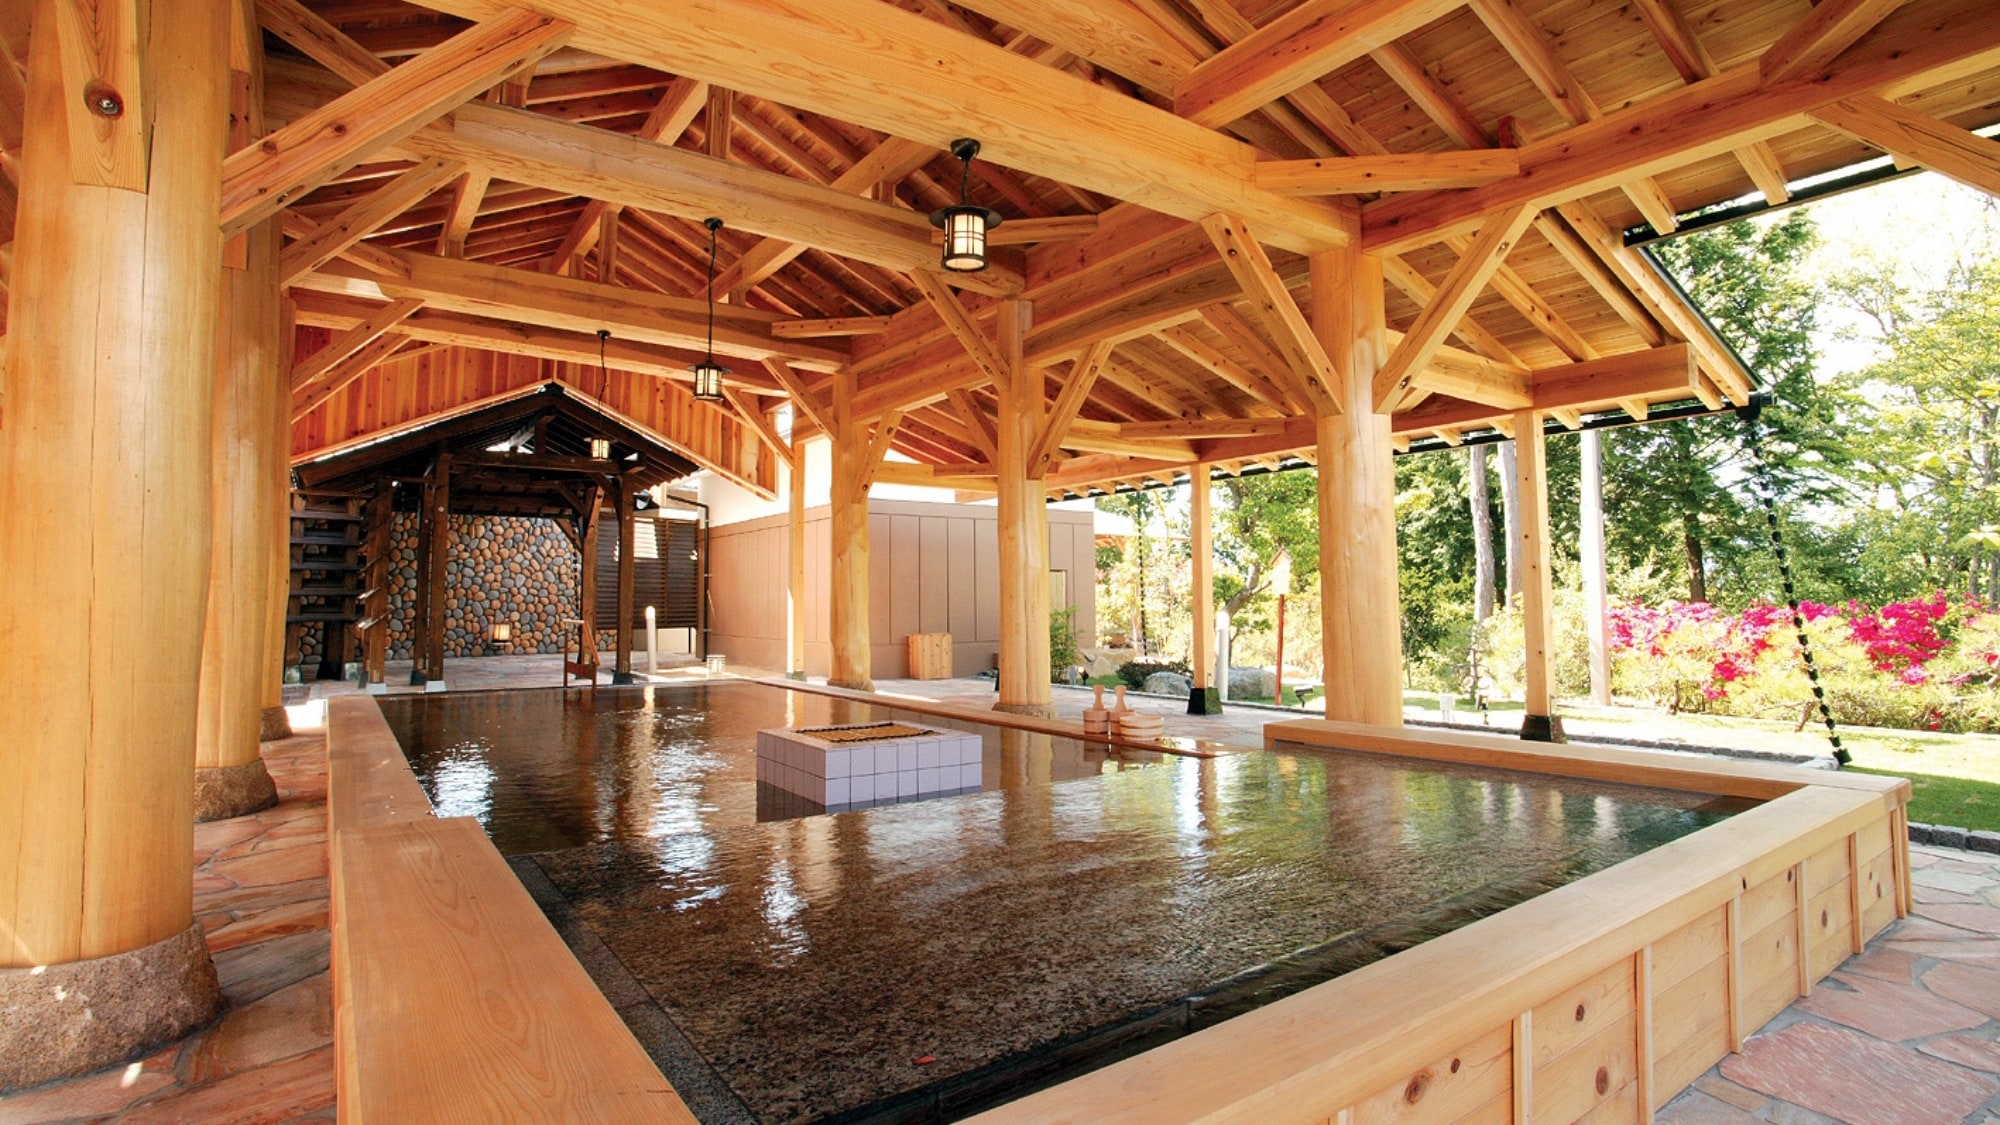 Hot spring: Open-air detailed information